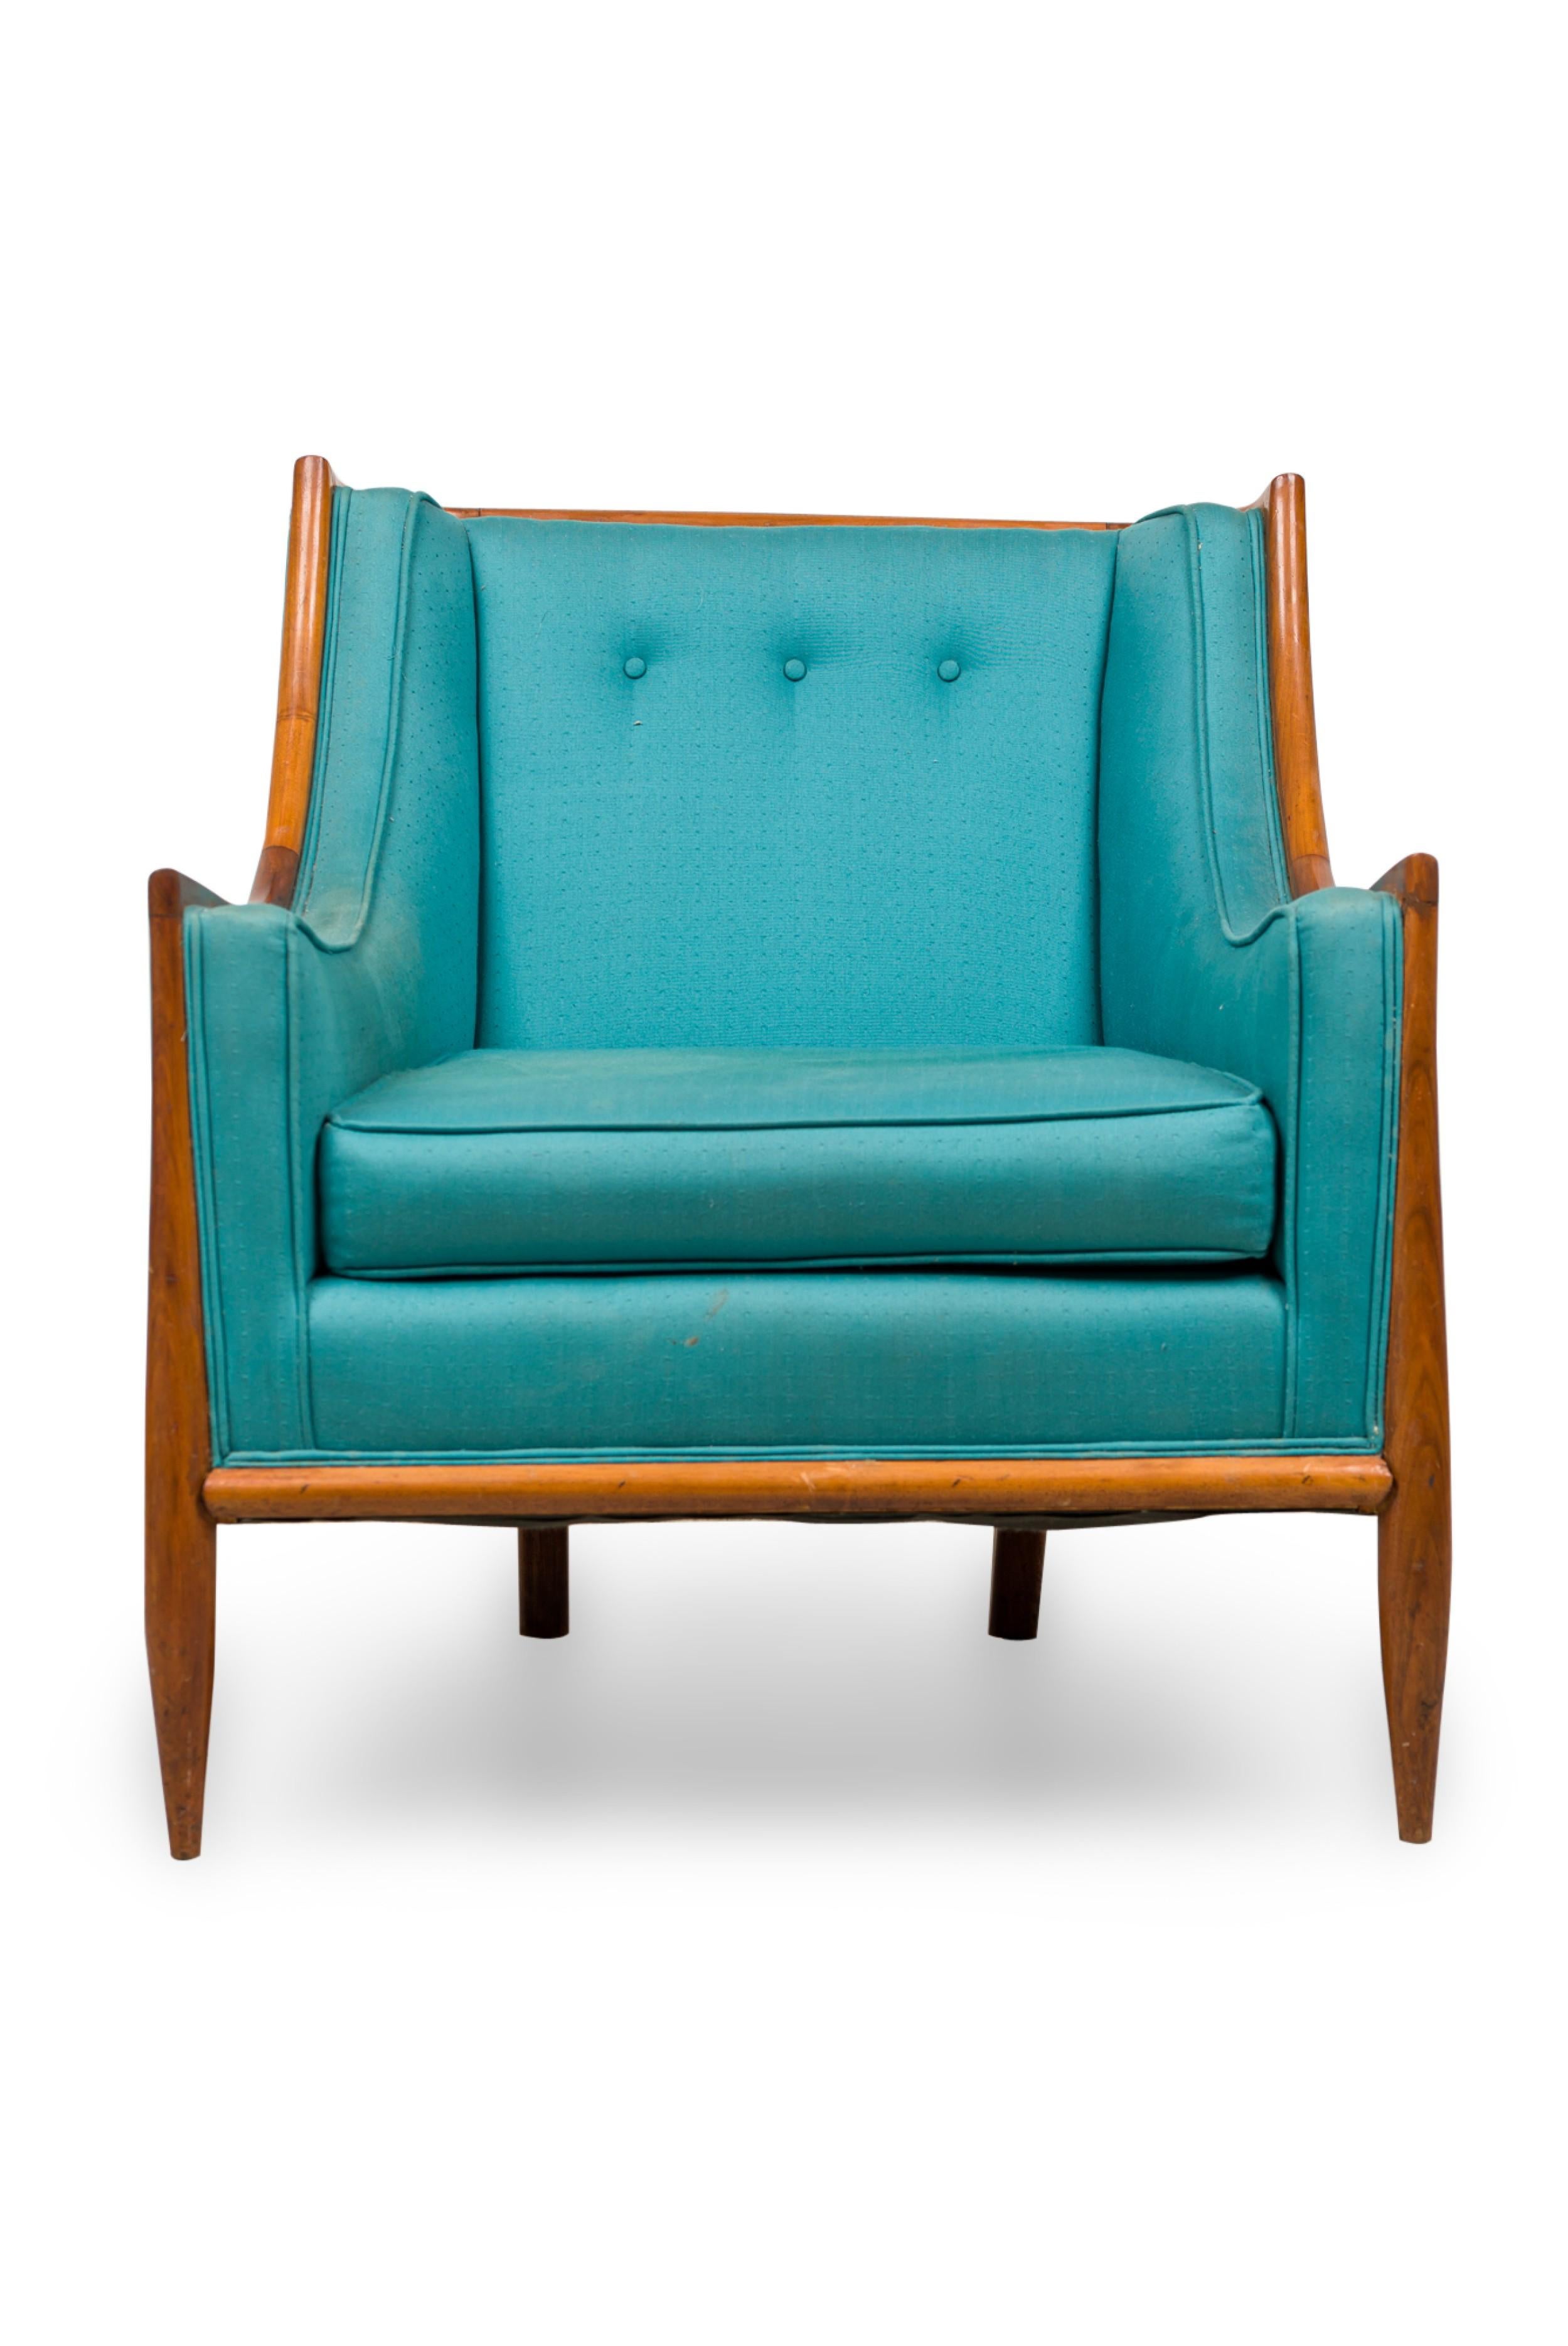 PAIR of Mid-Century Modern bergere armchairs with walnut frames, upholstered in a blue / teal textured fabric, resting on four tapered walnut legs. (T.H. ROBSJOHN-GIBBINGS)(PRICED AS PAIR)
